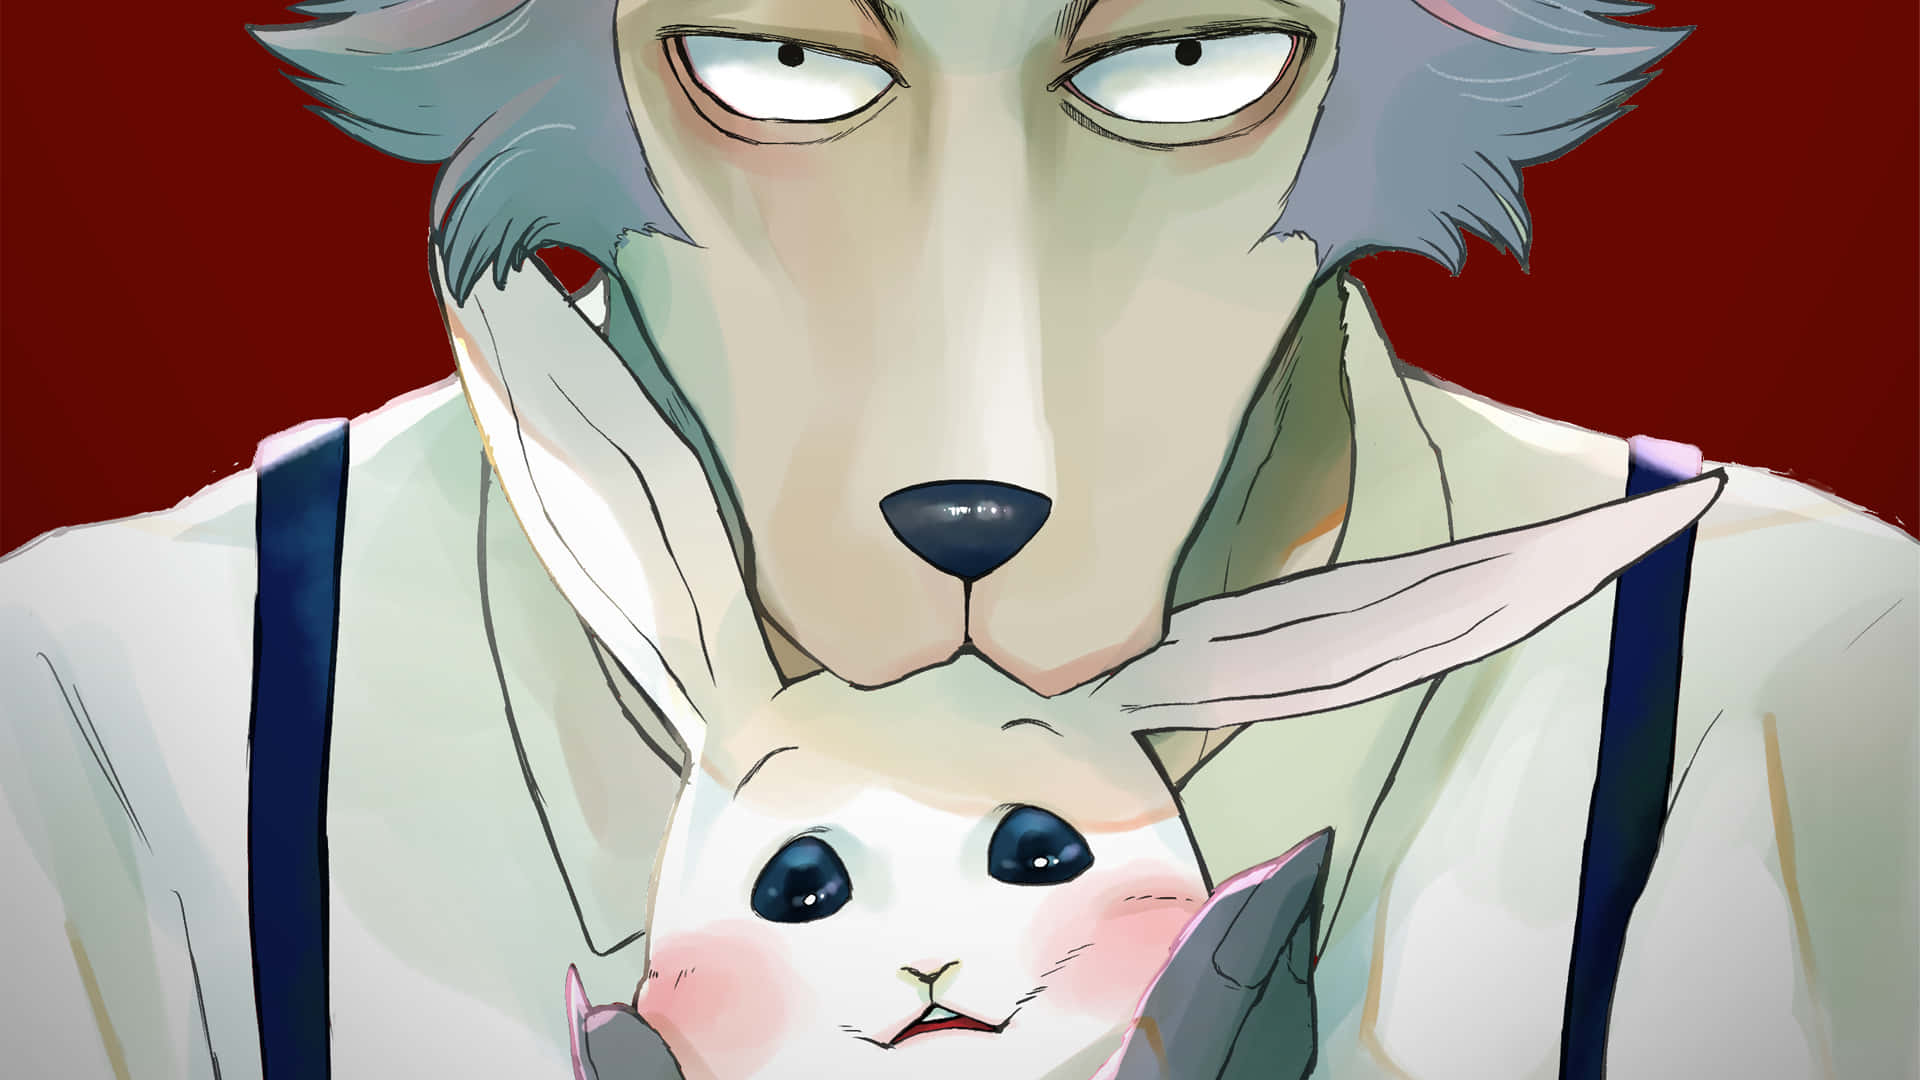 Growing closer through the friendship and kindness of the Beastars